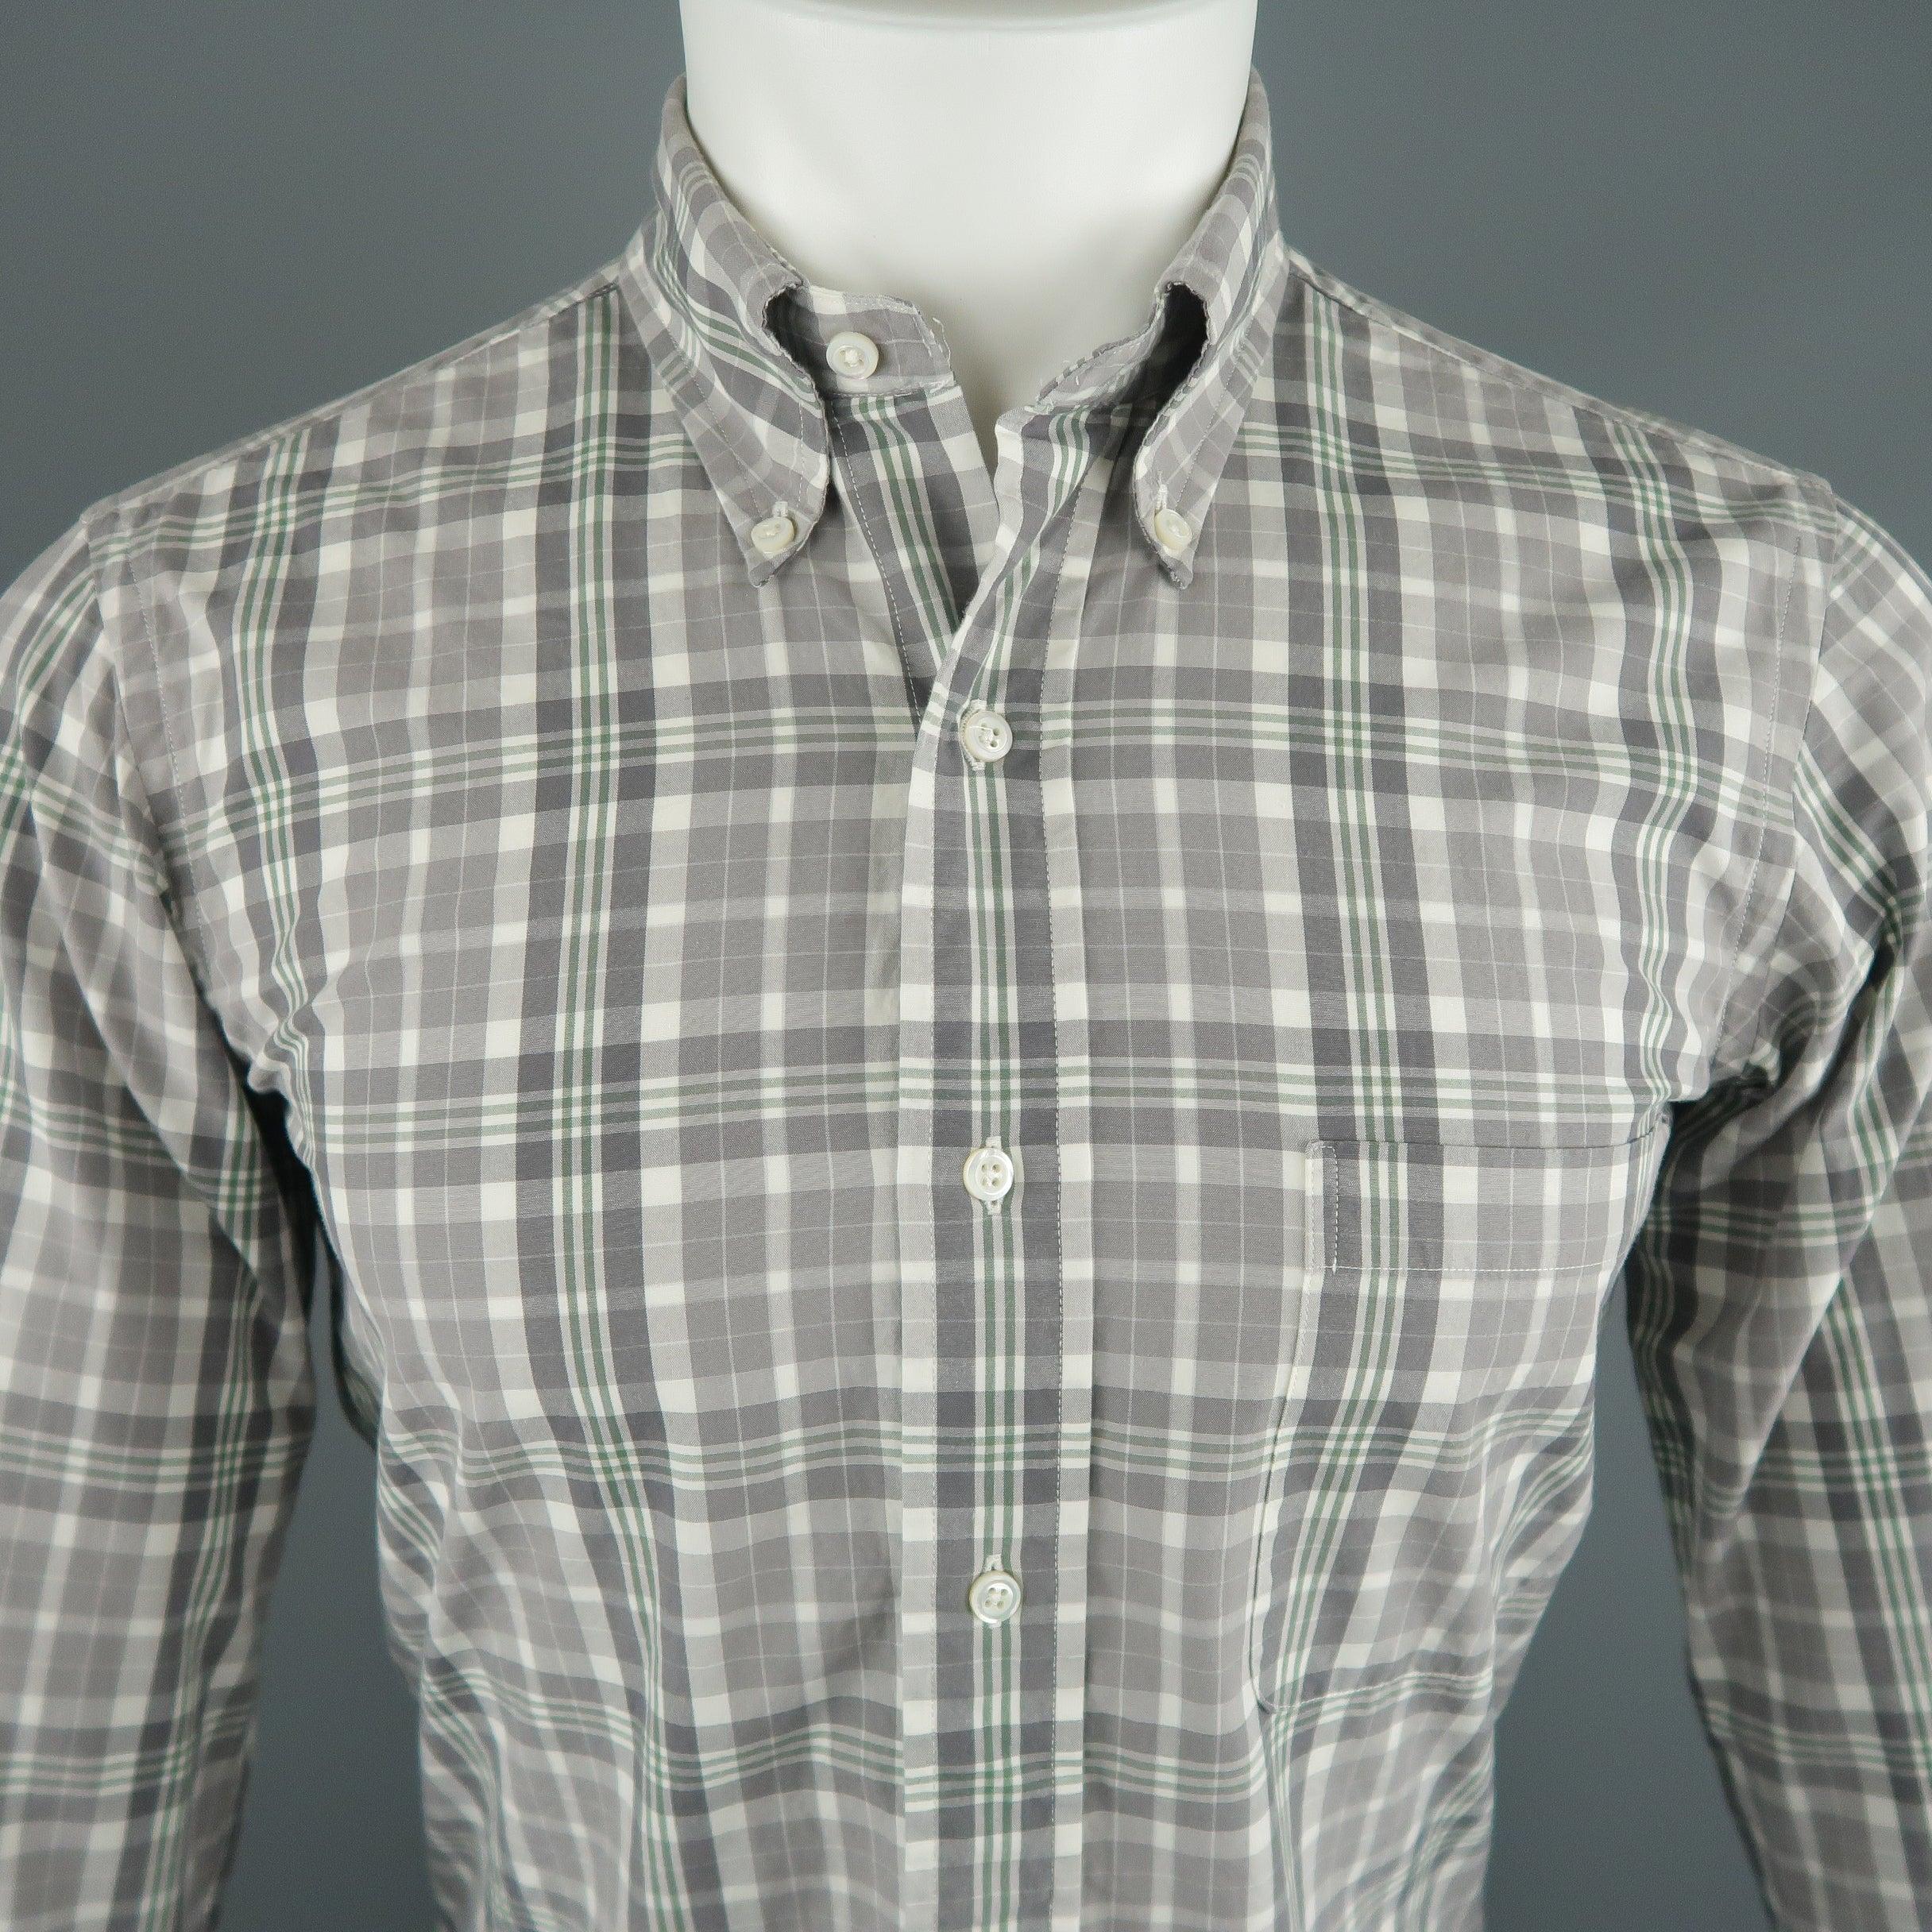 THOM BROWNE Long Sleeve Shirt comes in white, green and grey tones in a plaid cotton material, button down, with a front patch pocket and buttoned cuffs. Made in USA. 
Excellent Pre-Owned Condition.
 

Marked:   1
 

Measurements: 
  
l	Shoulder: